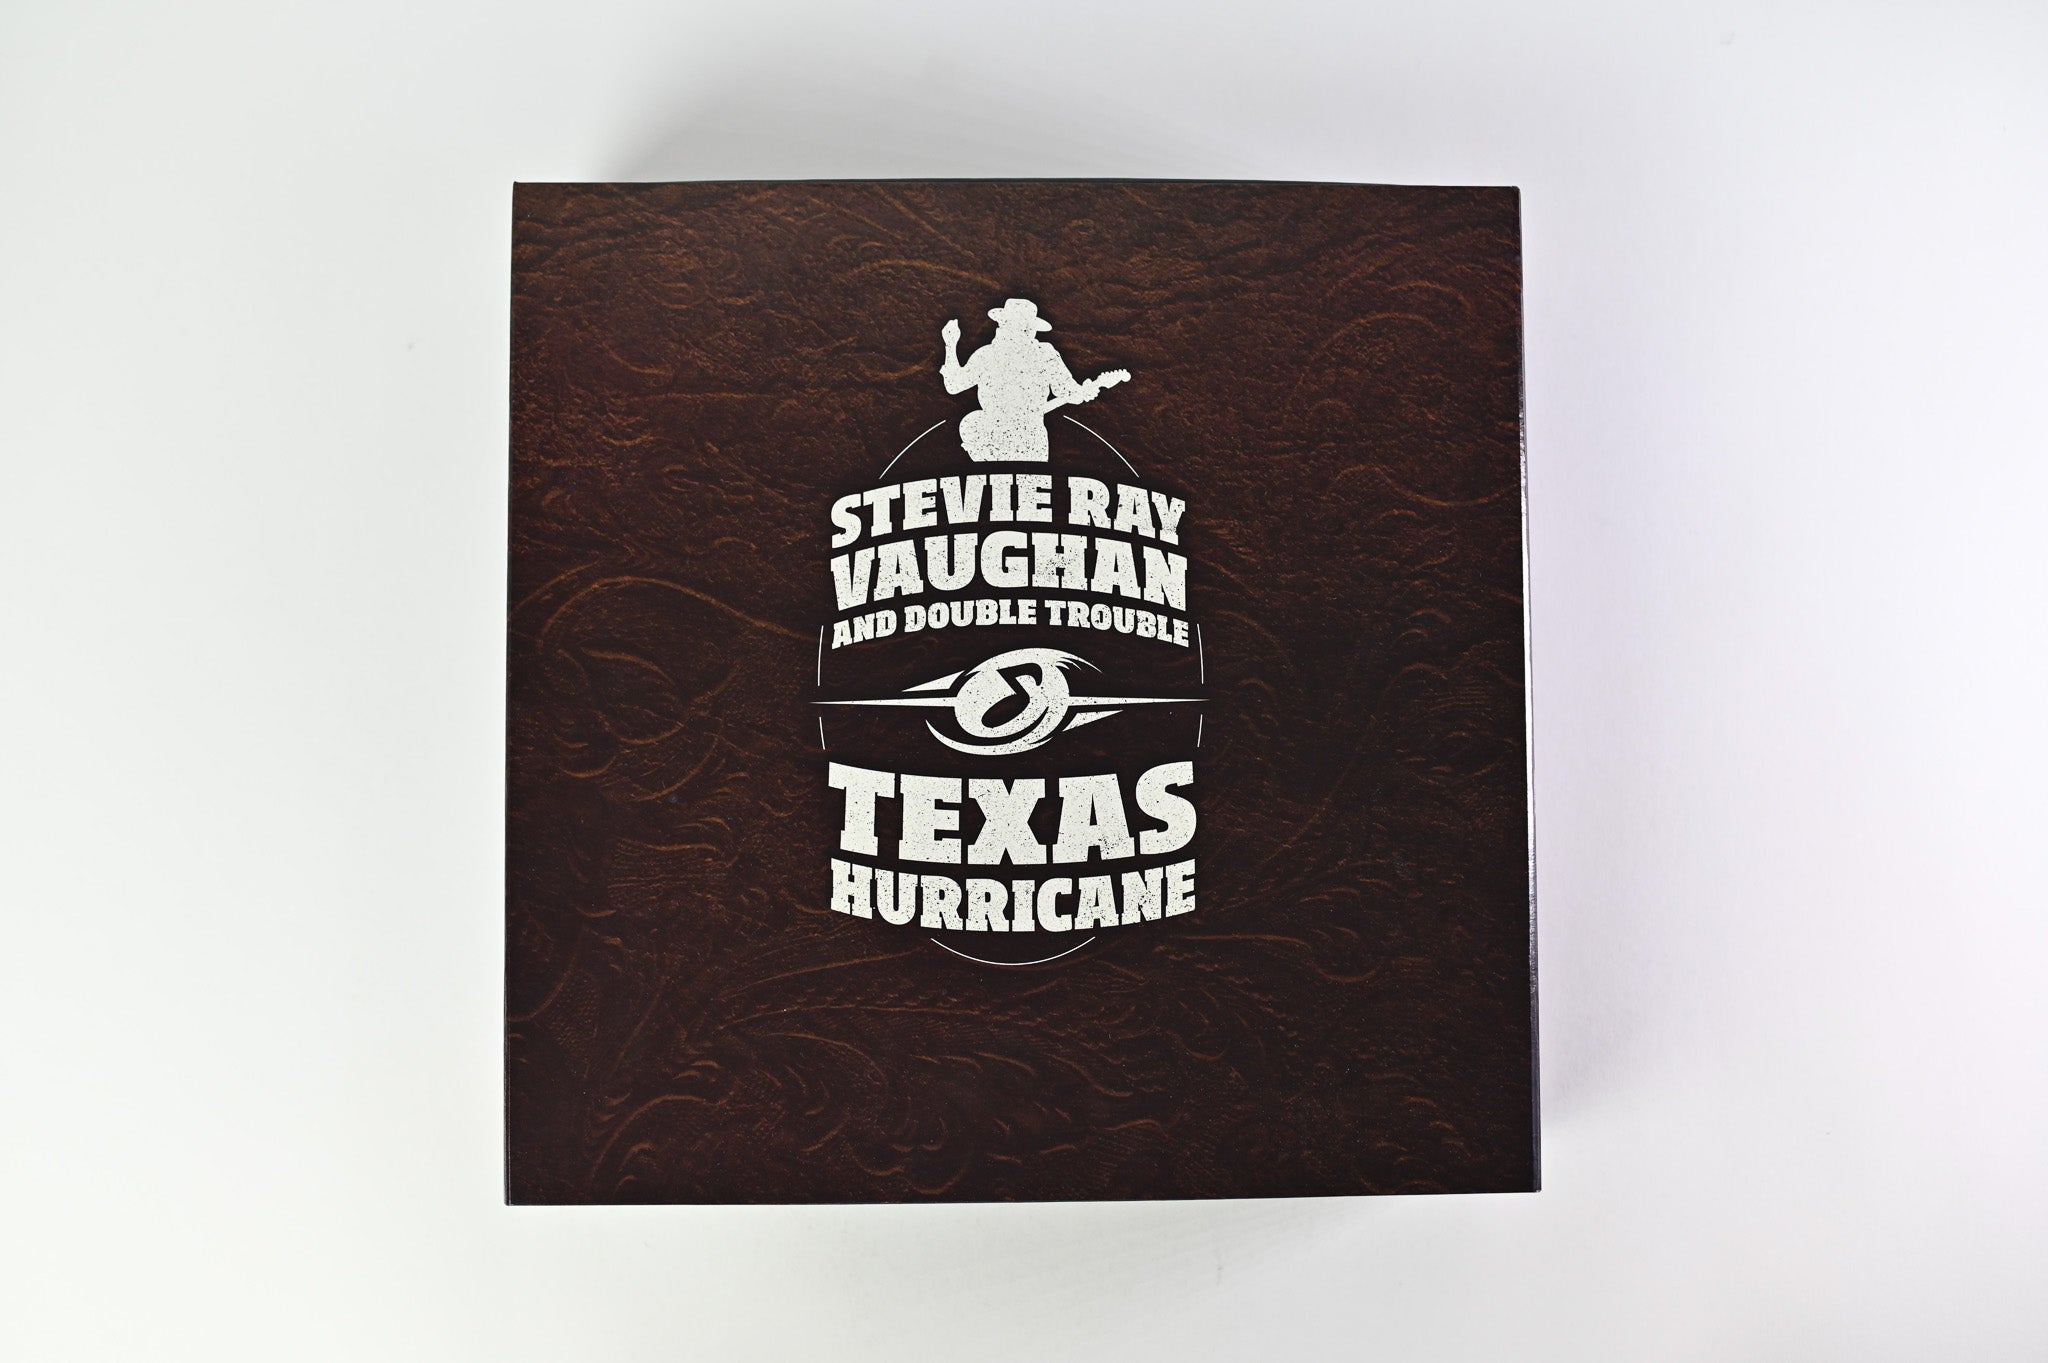 Stevie Ray Vaughan & Double Trouble - Texas Hurricane Analogue Productions 6 LP Ltd Special Edition Box Set